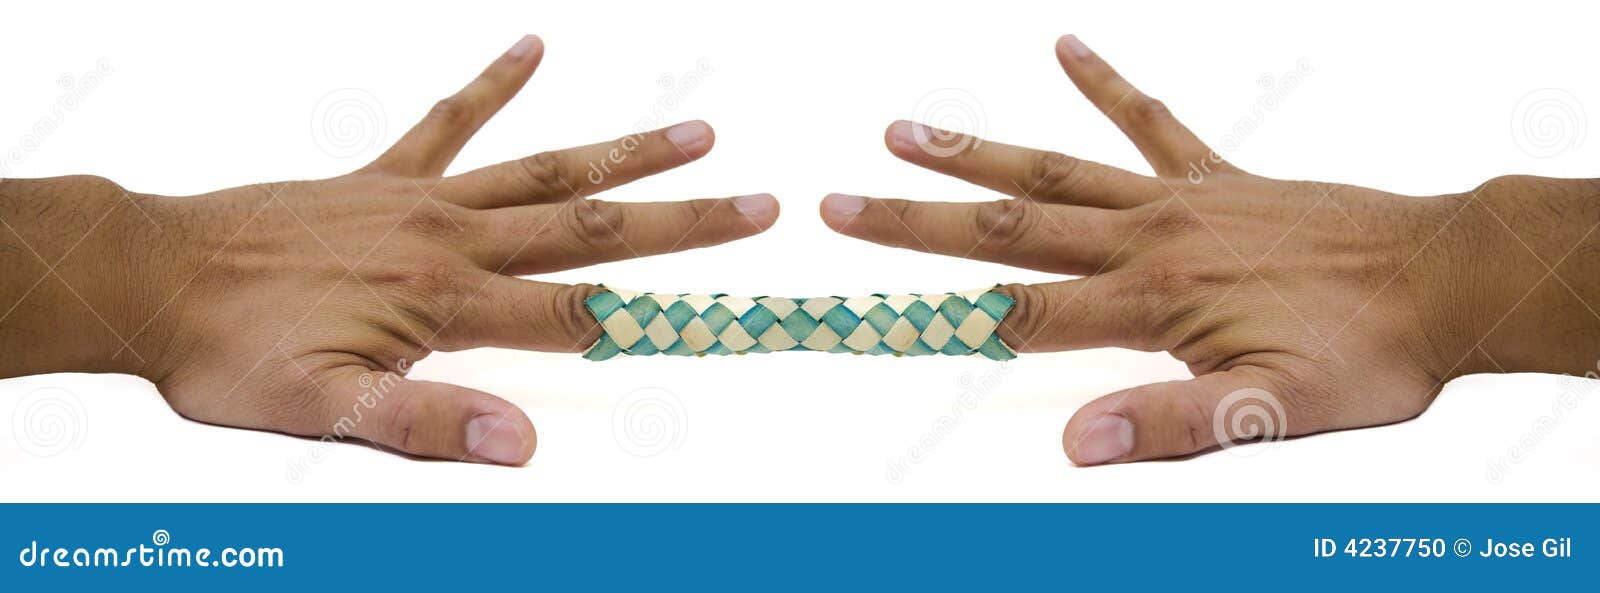 chinese finger trap 2